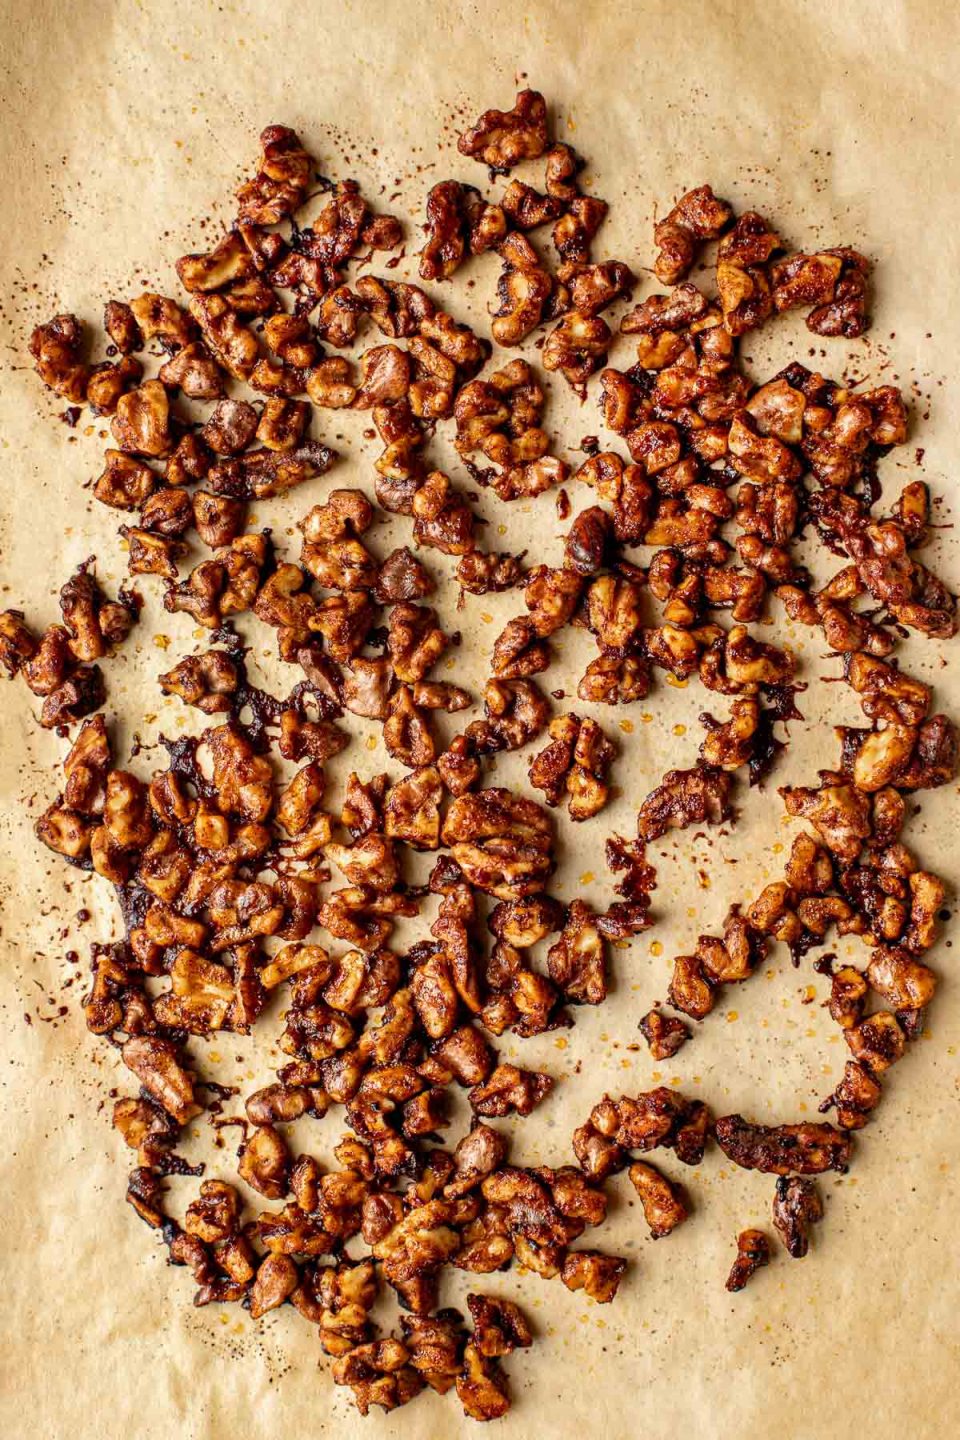 Roasted Maple Spiced Walnuts rest atop a piece of brown parchment paper.